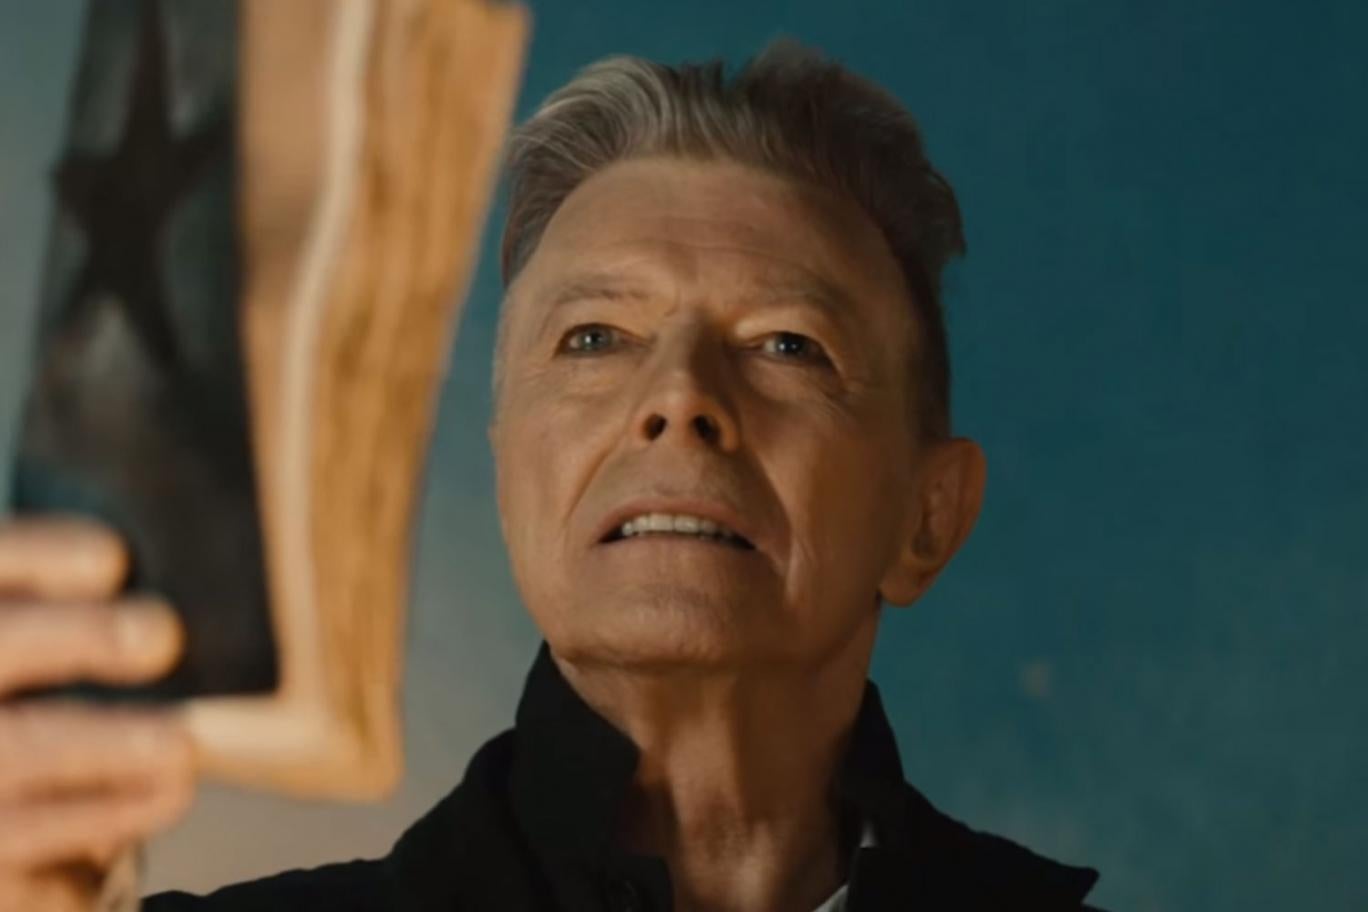 David Bowie: vinyl contains secrets didn't know about, designer reveals | The Independent | The Independent